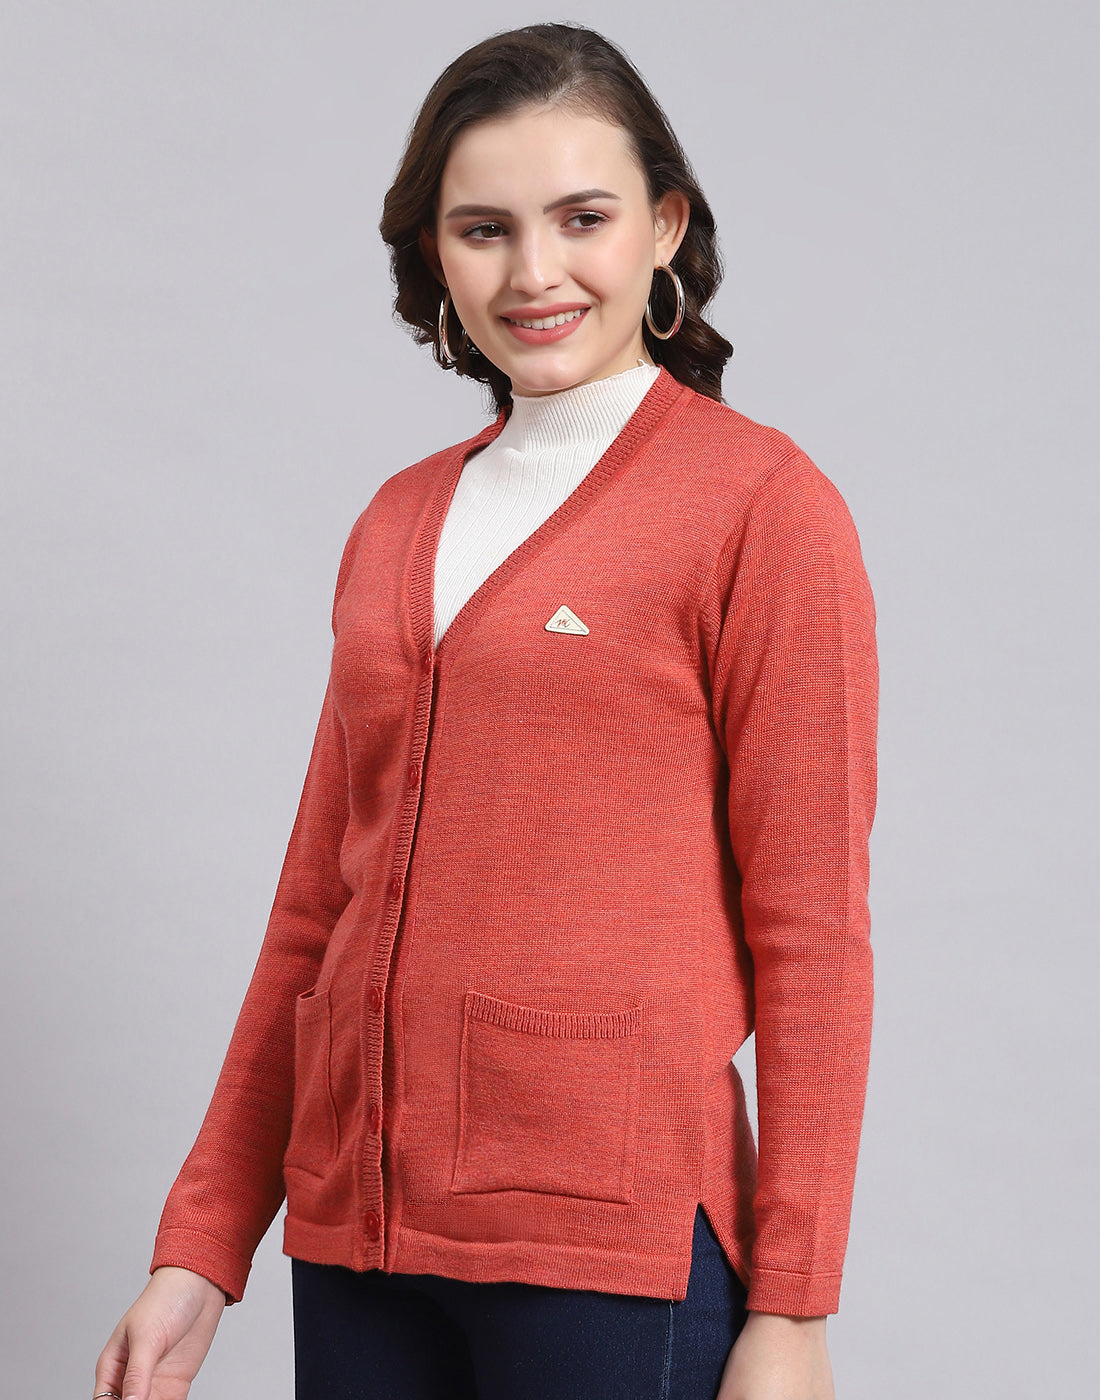 Women Pink Solid V Neck Full Sleeve Sweater